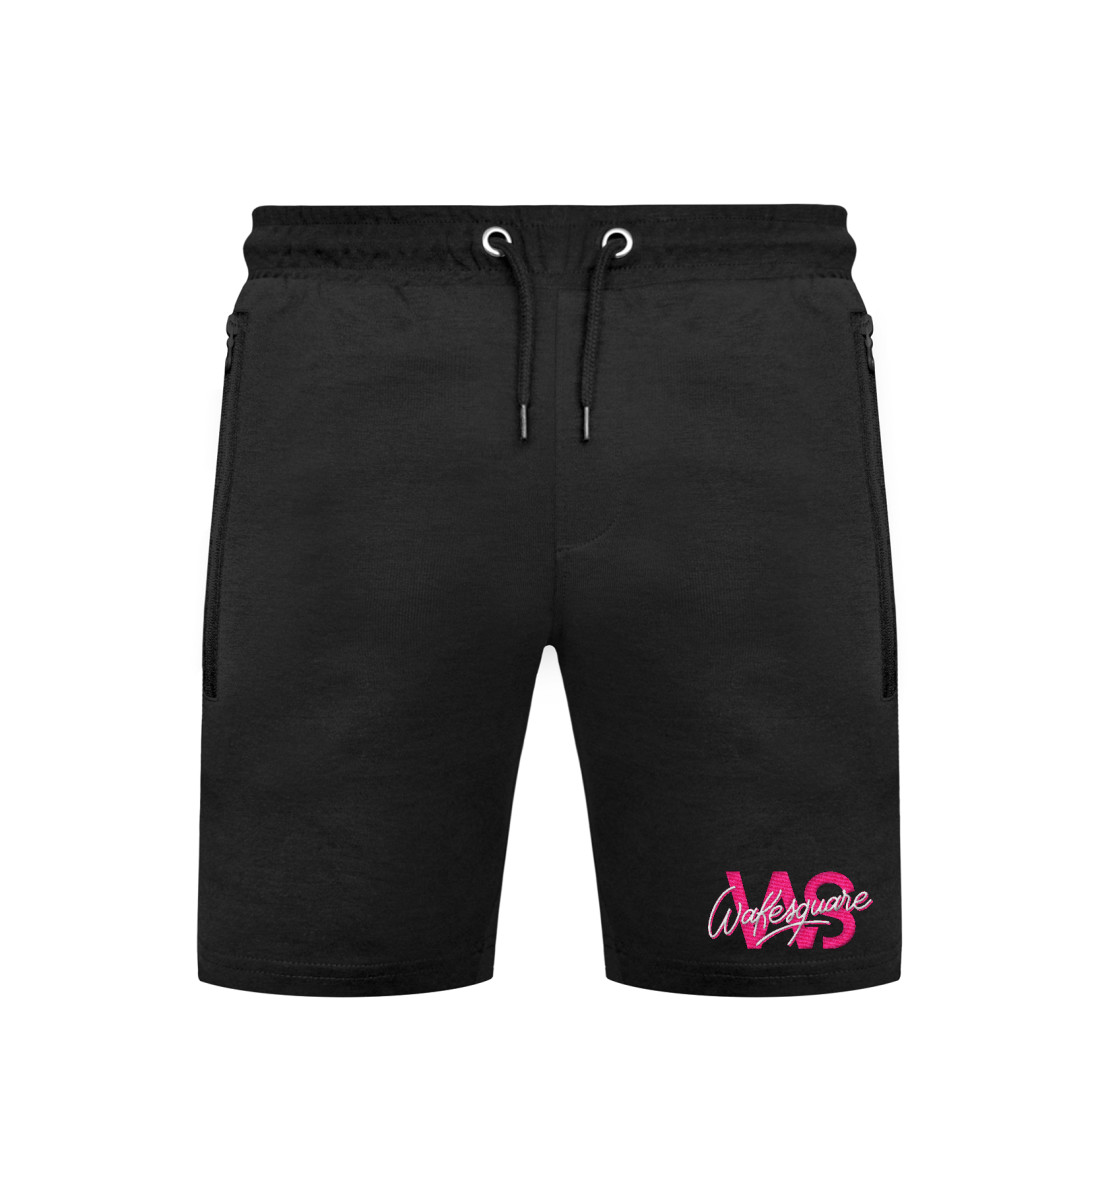 Shorts Classic Signature 01 - Unisex Sweat Shorts with Embroidery-16